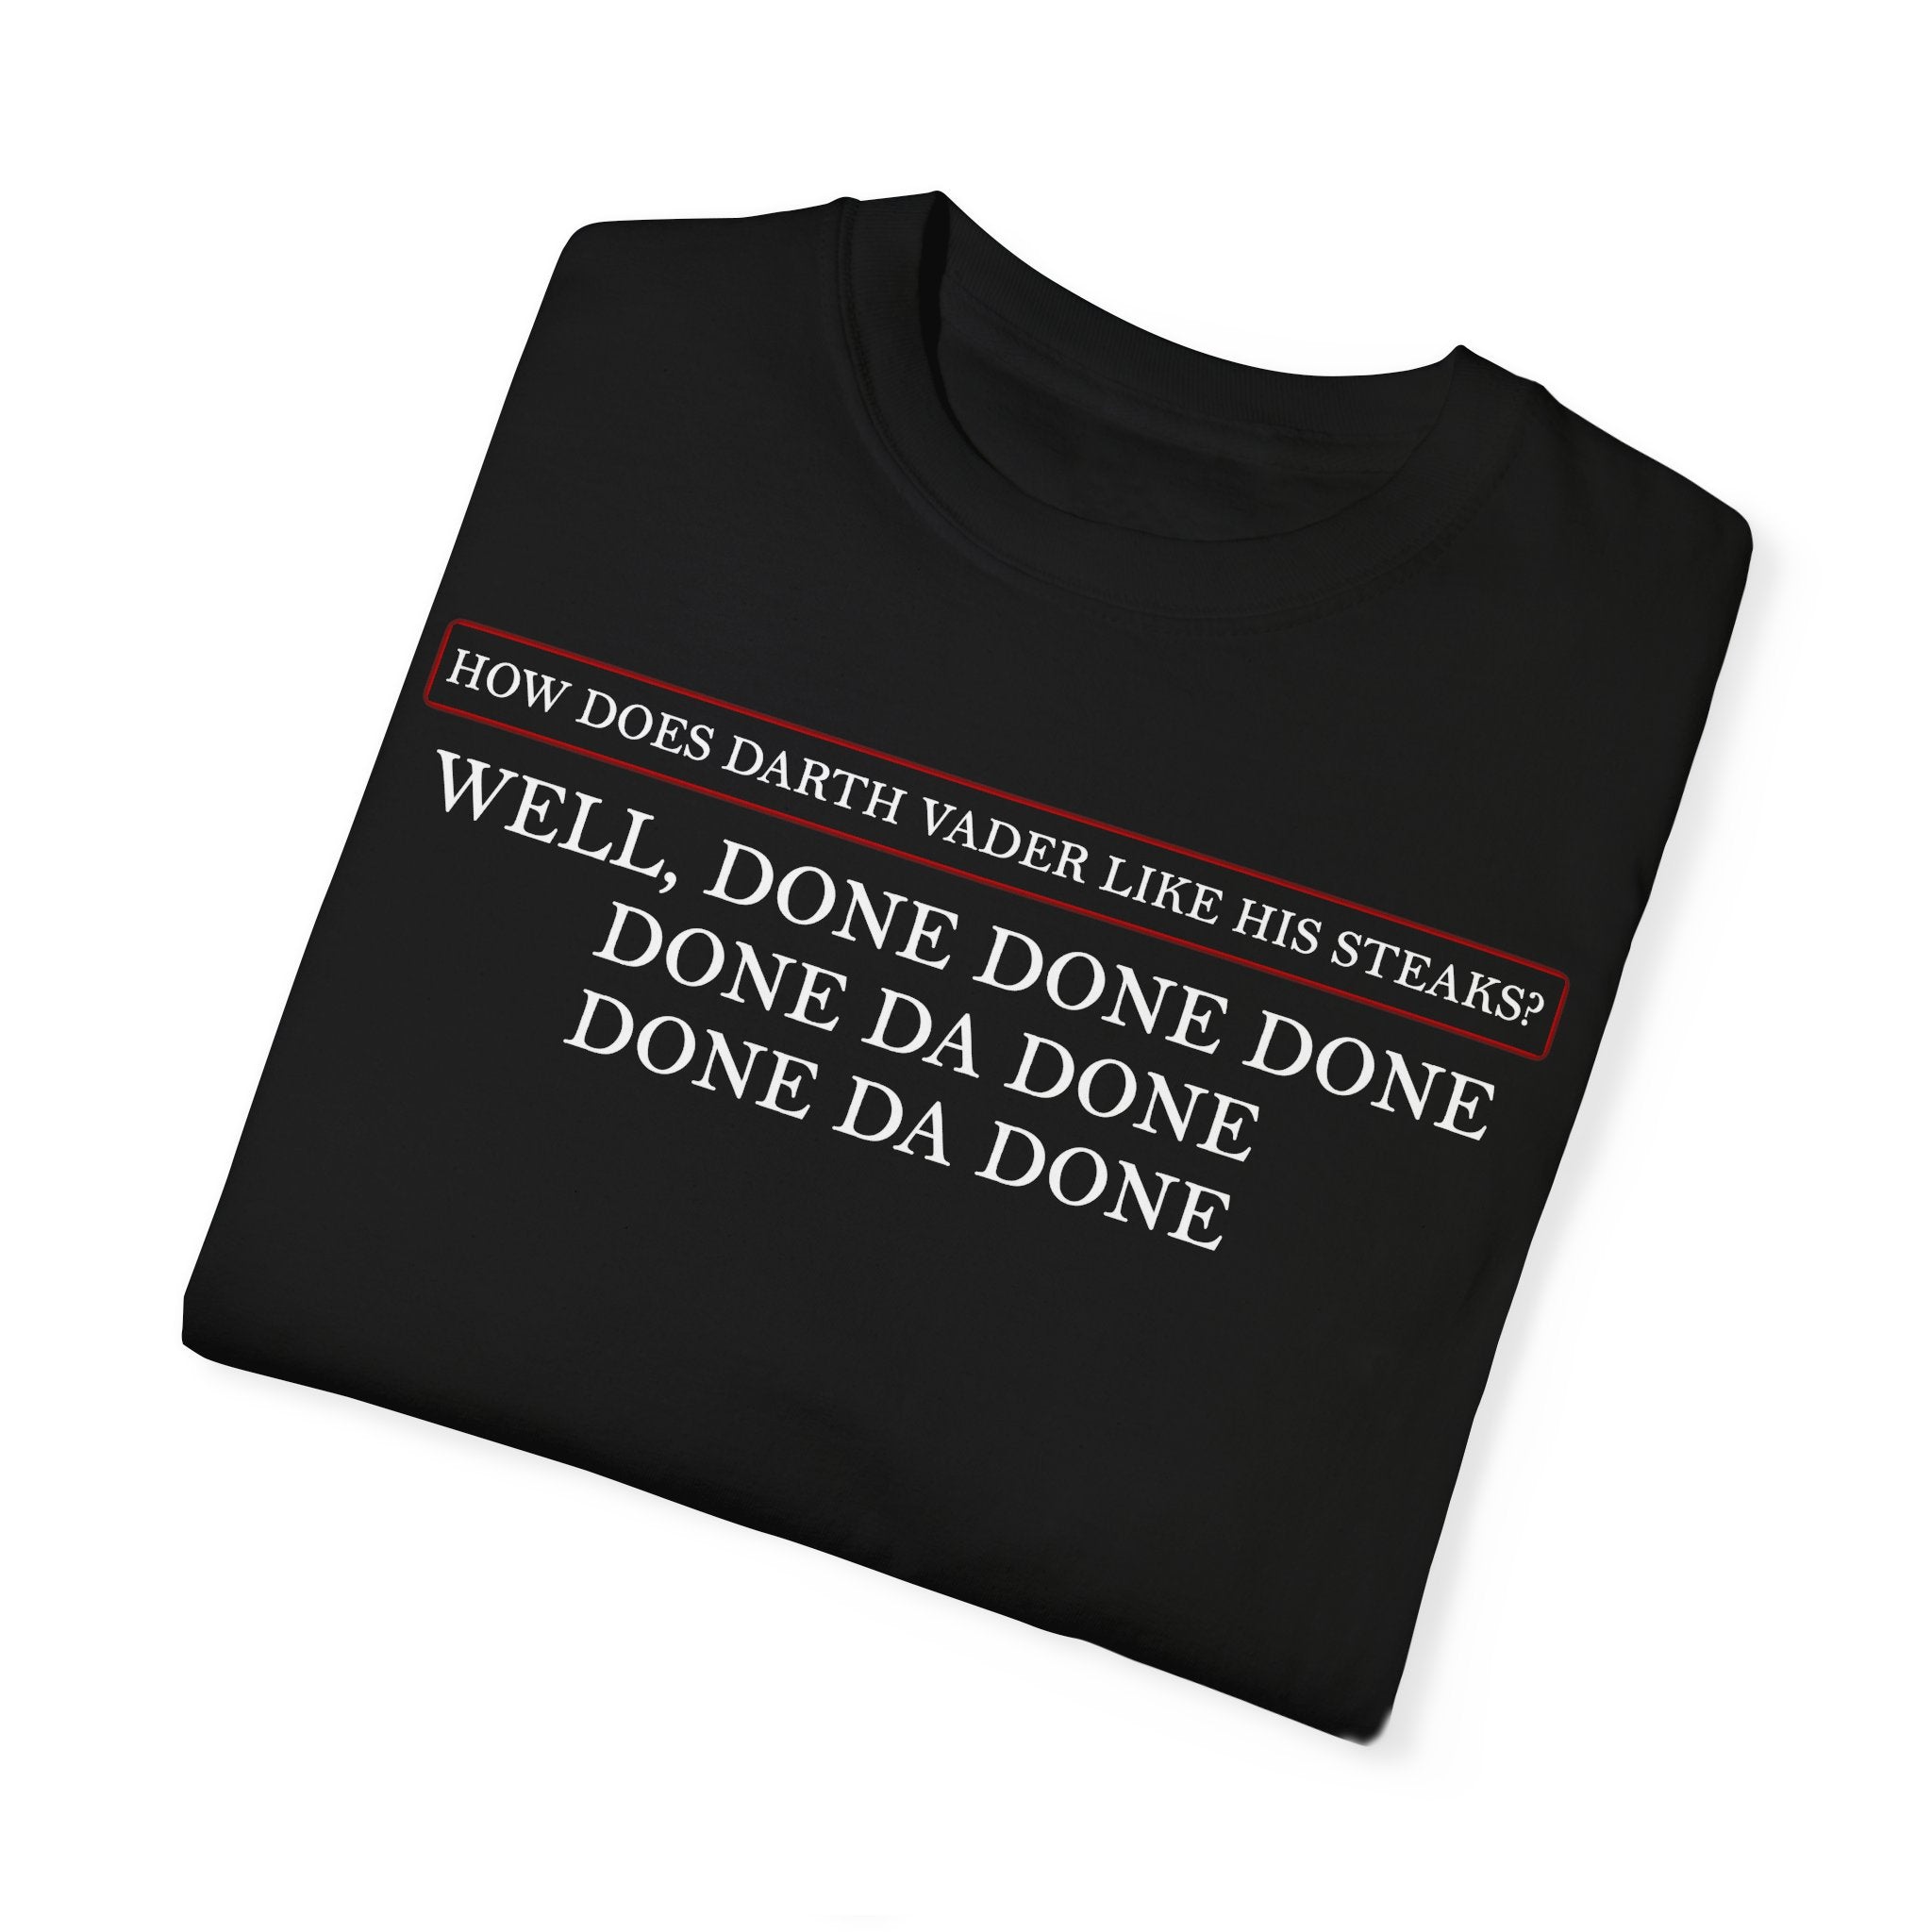 Darth Vader Well Done Steaks Tee